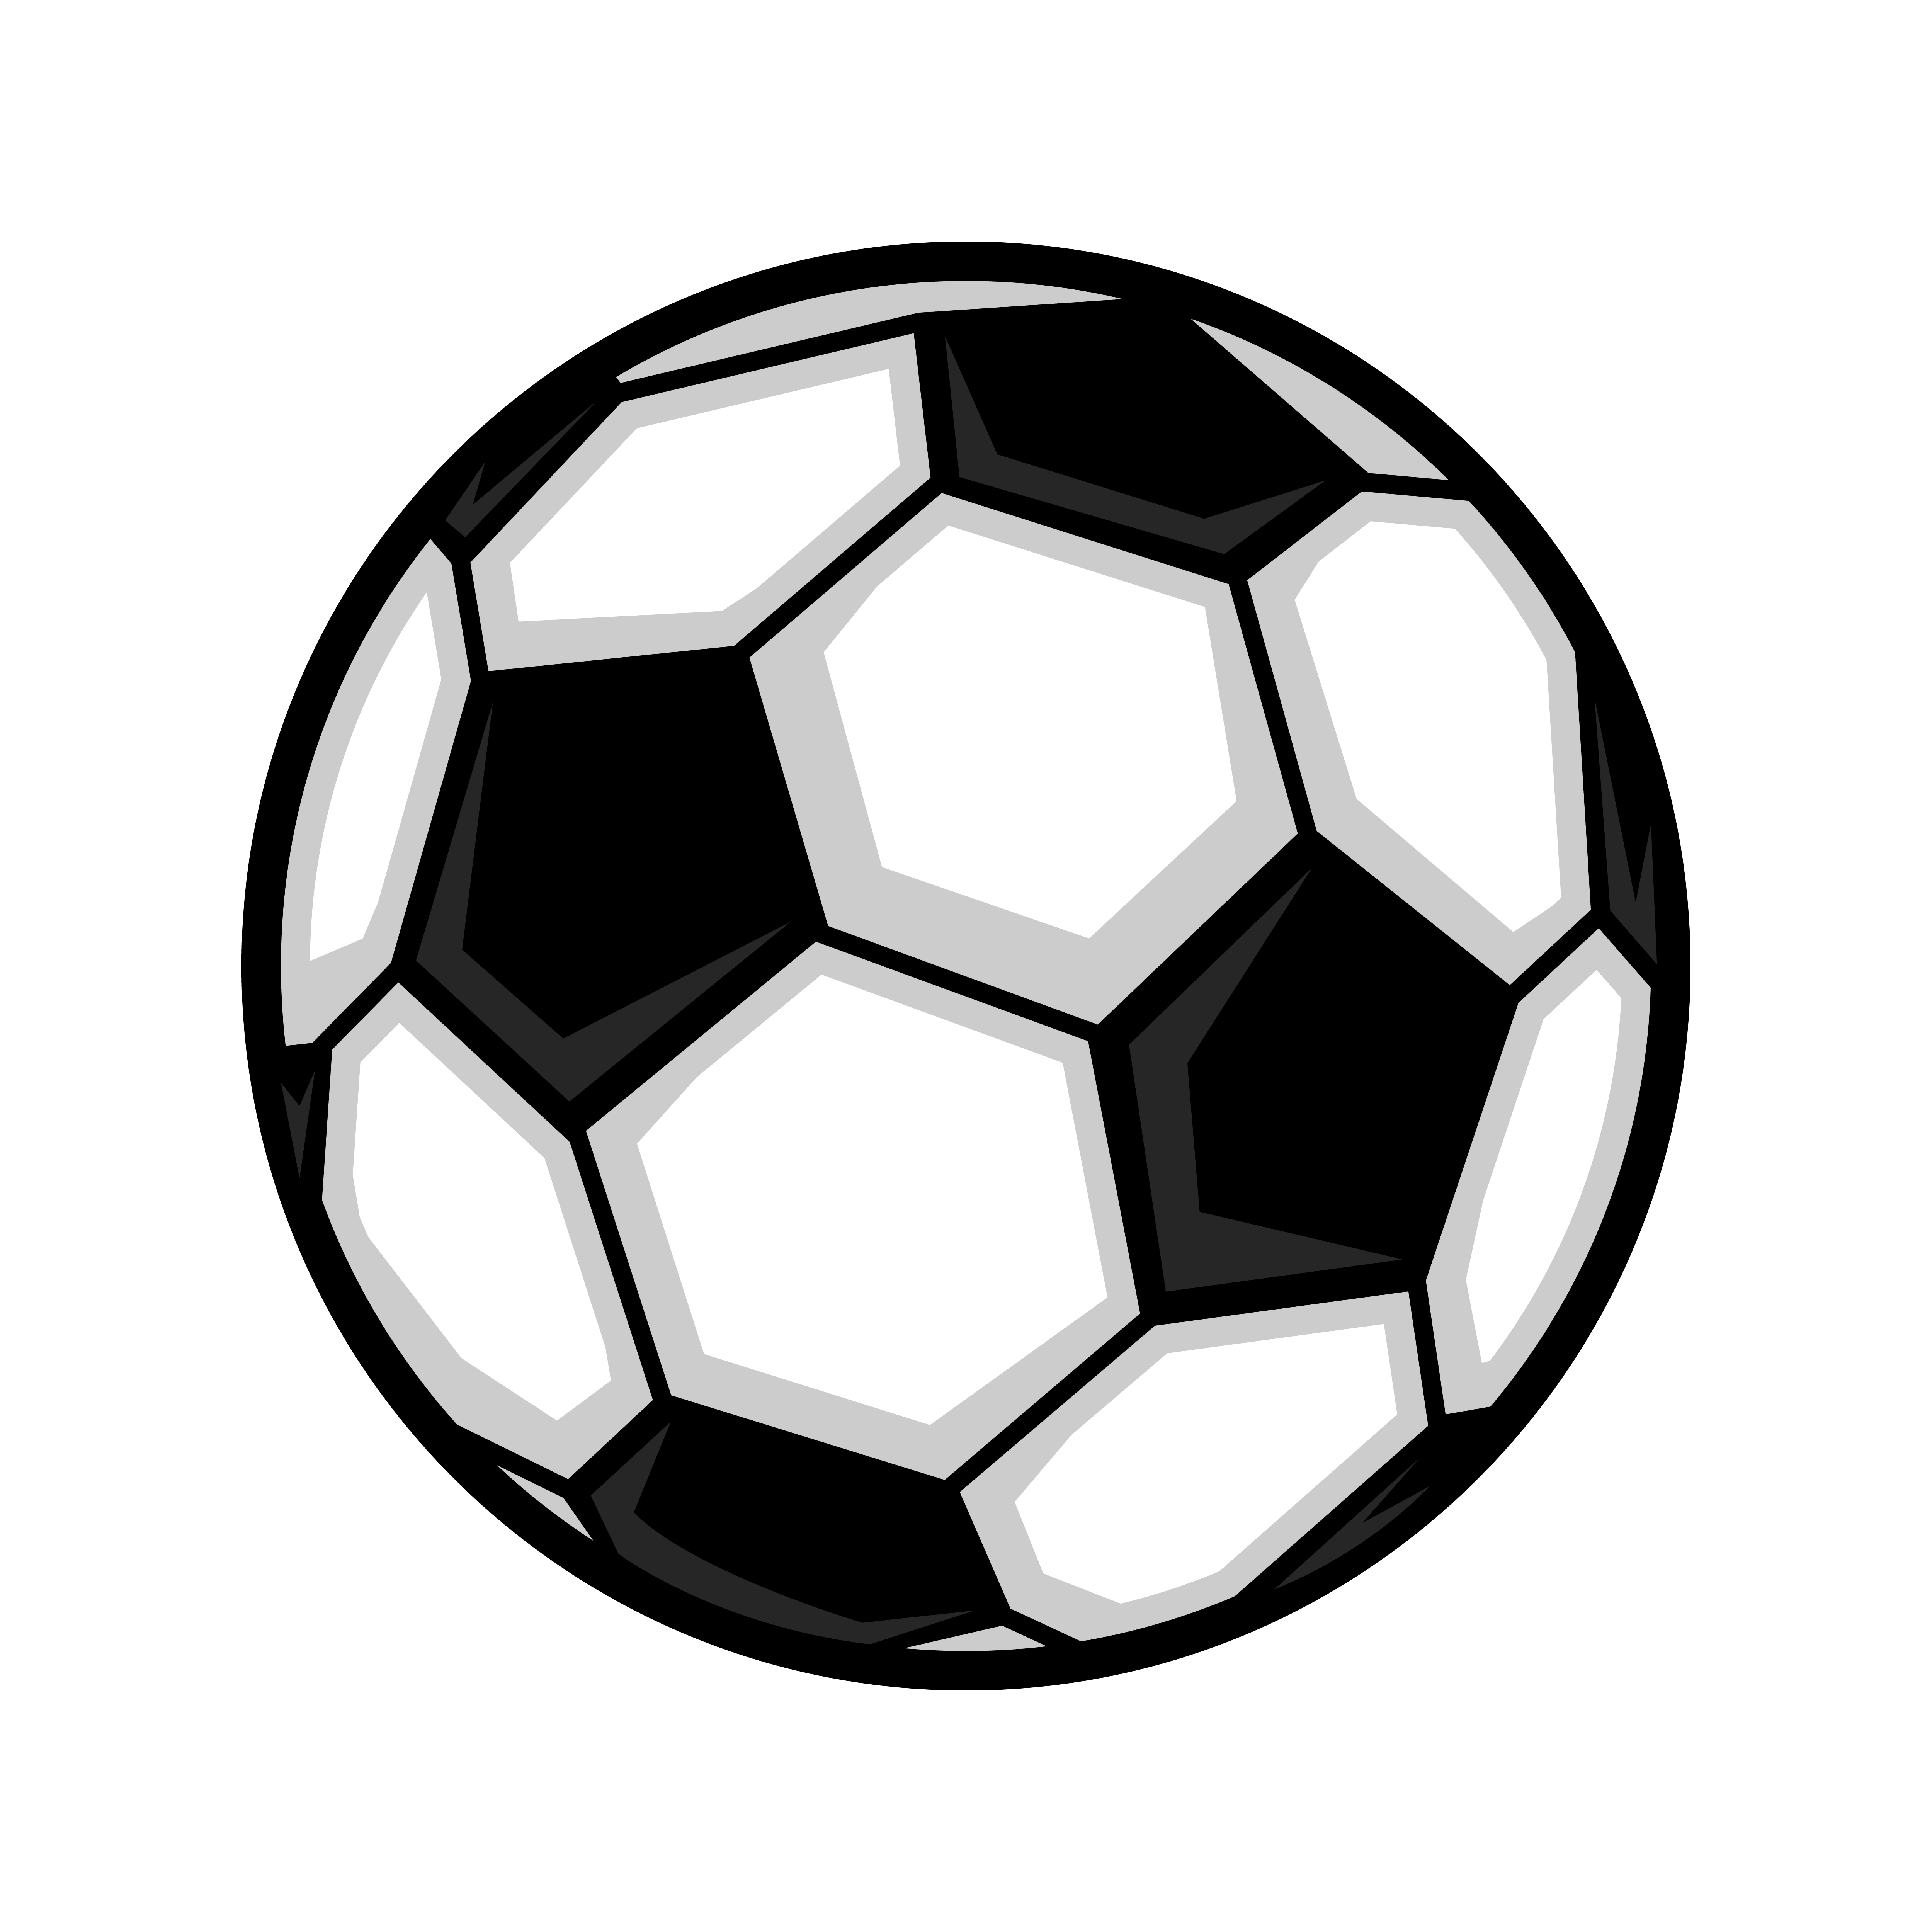 Download Soccer Ball vector icon - Download Free Vectors, Clipart ...